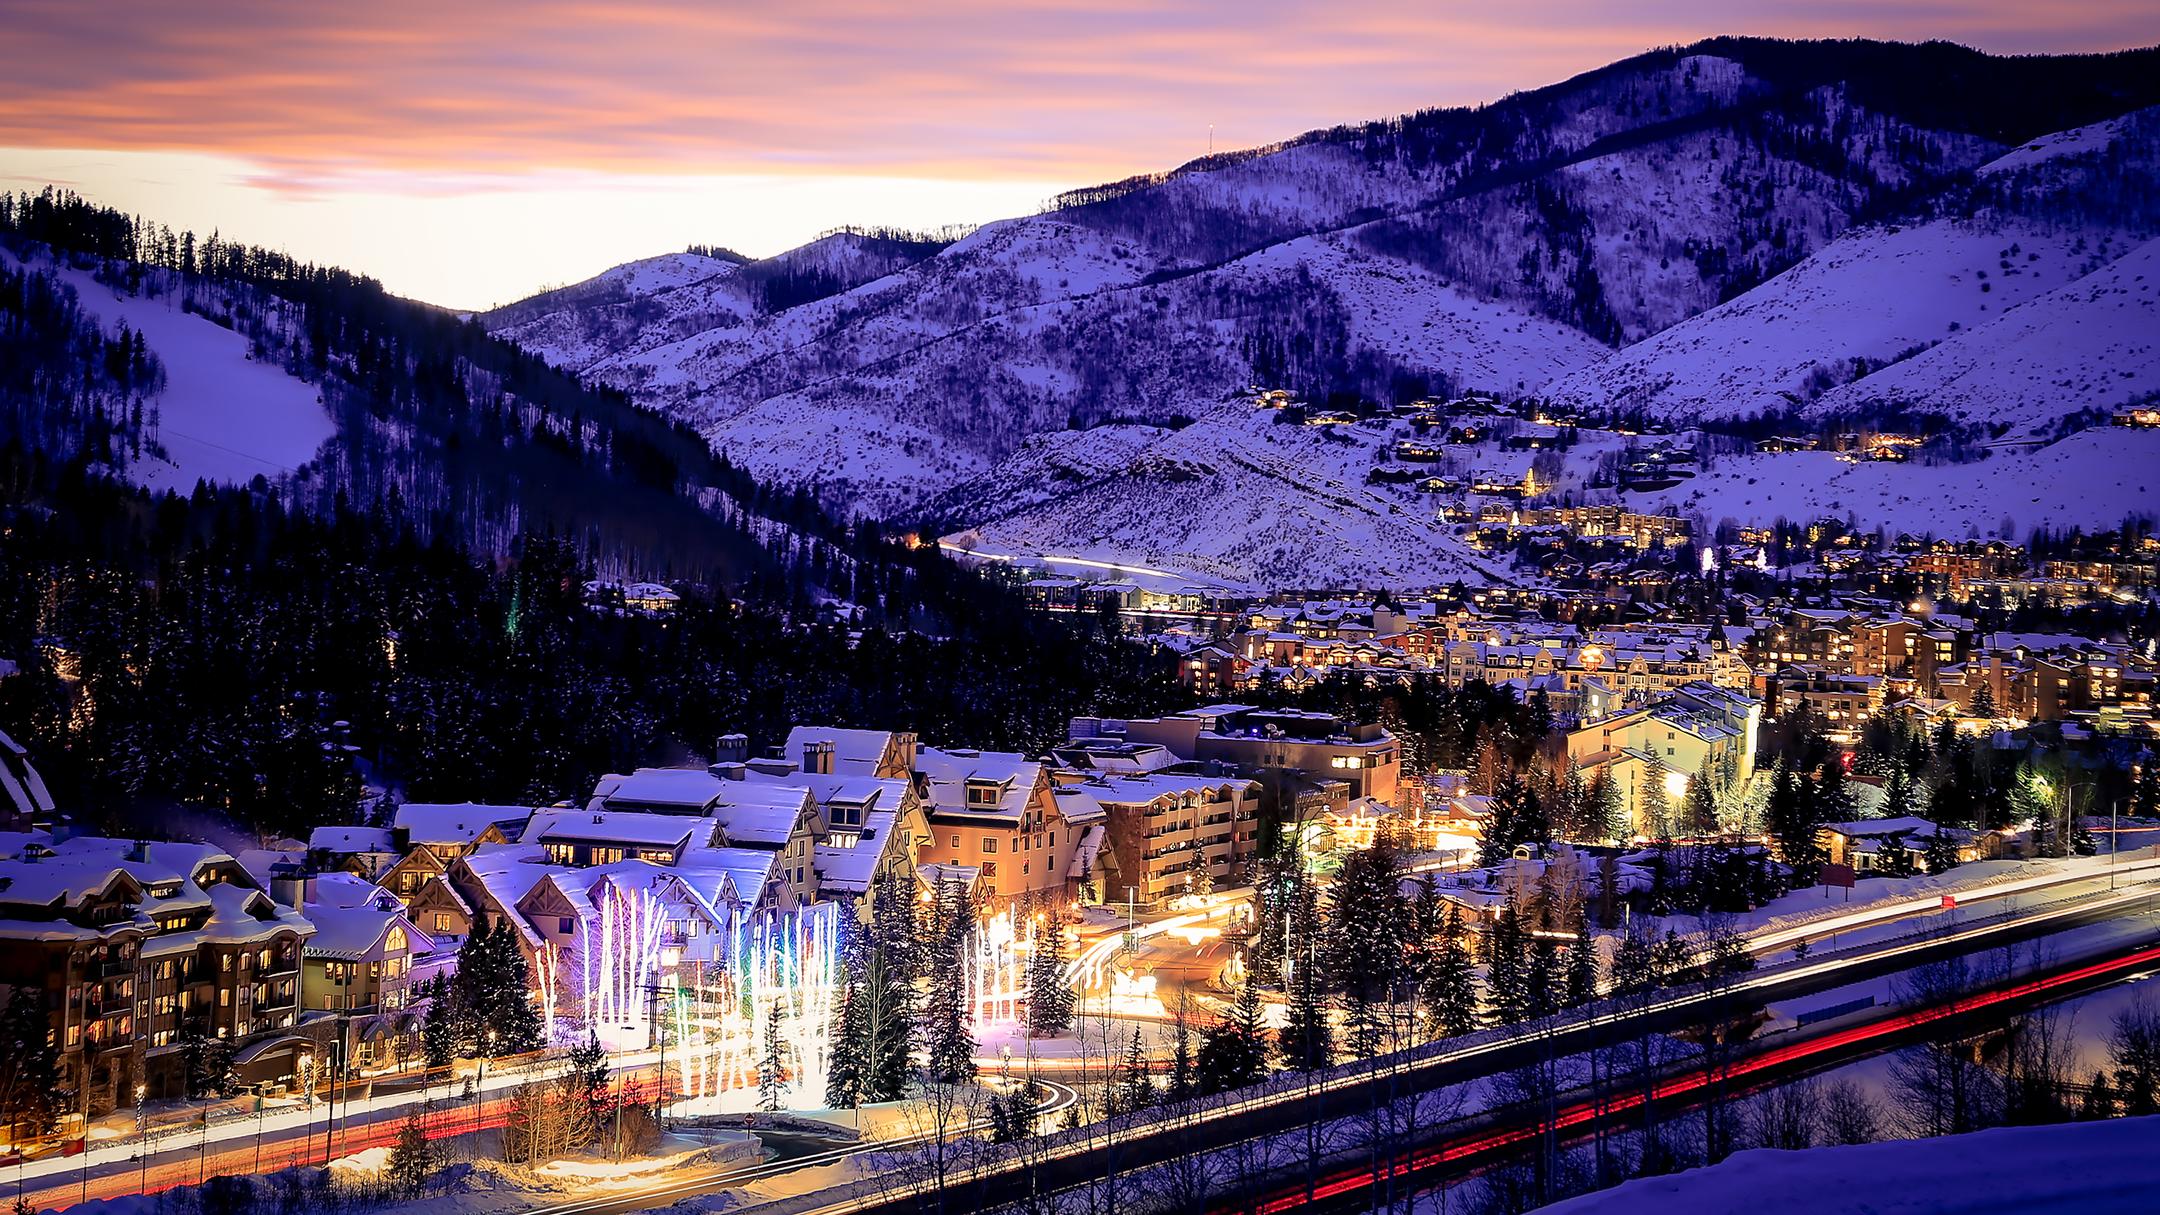 16 Best Hotels in Vail. Hotels from $176/night - KAYAK